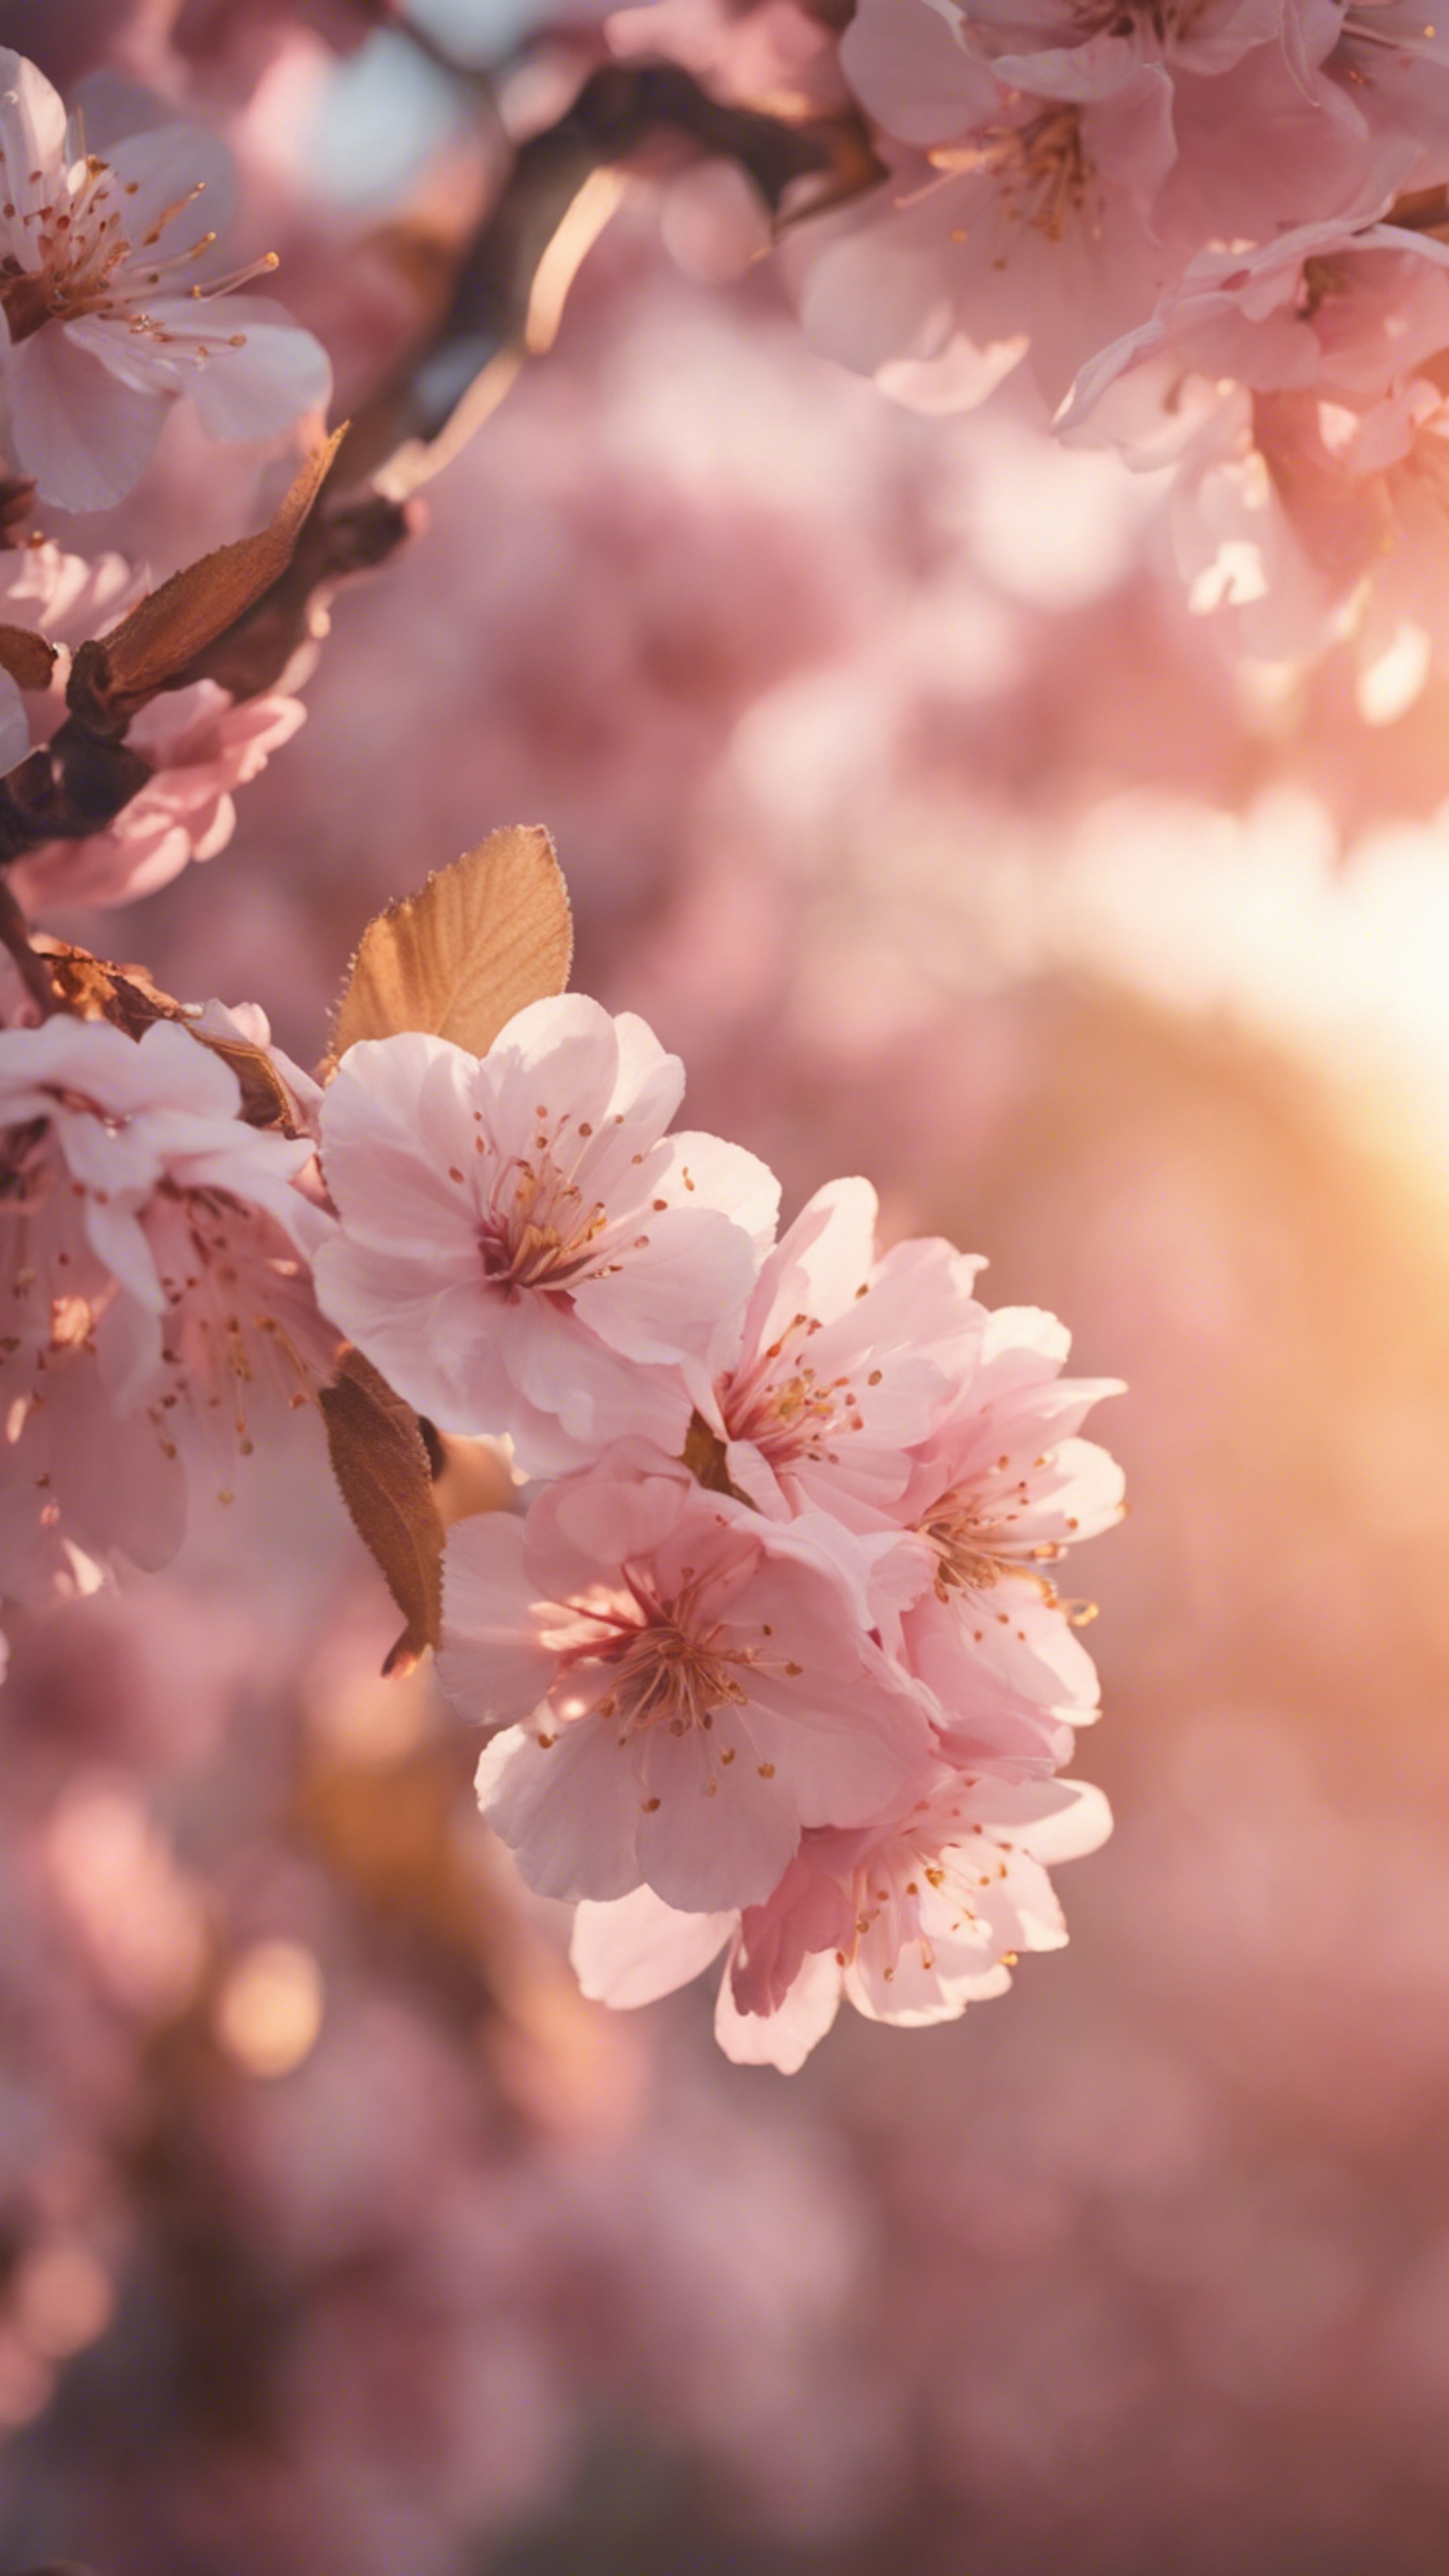 A delicate pink cherry blossom tree with gold leaves against a soft sunset. ផ្ទាំង​រូបភាព[63878b5c392143fbba4e]